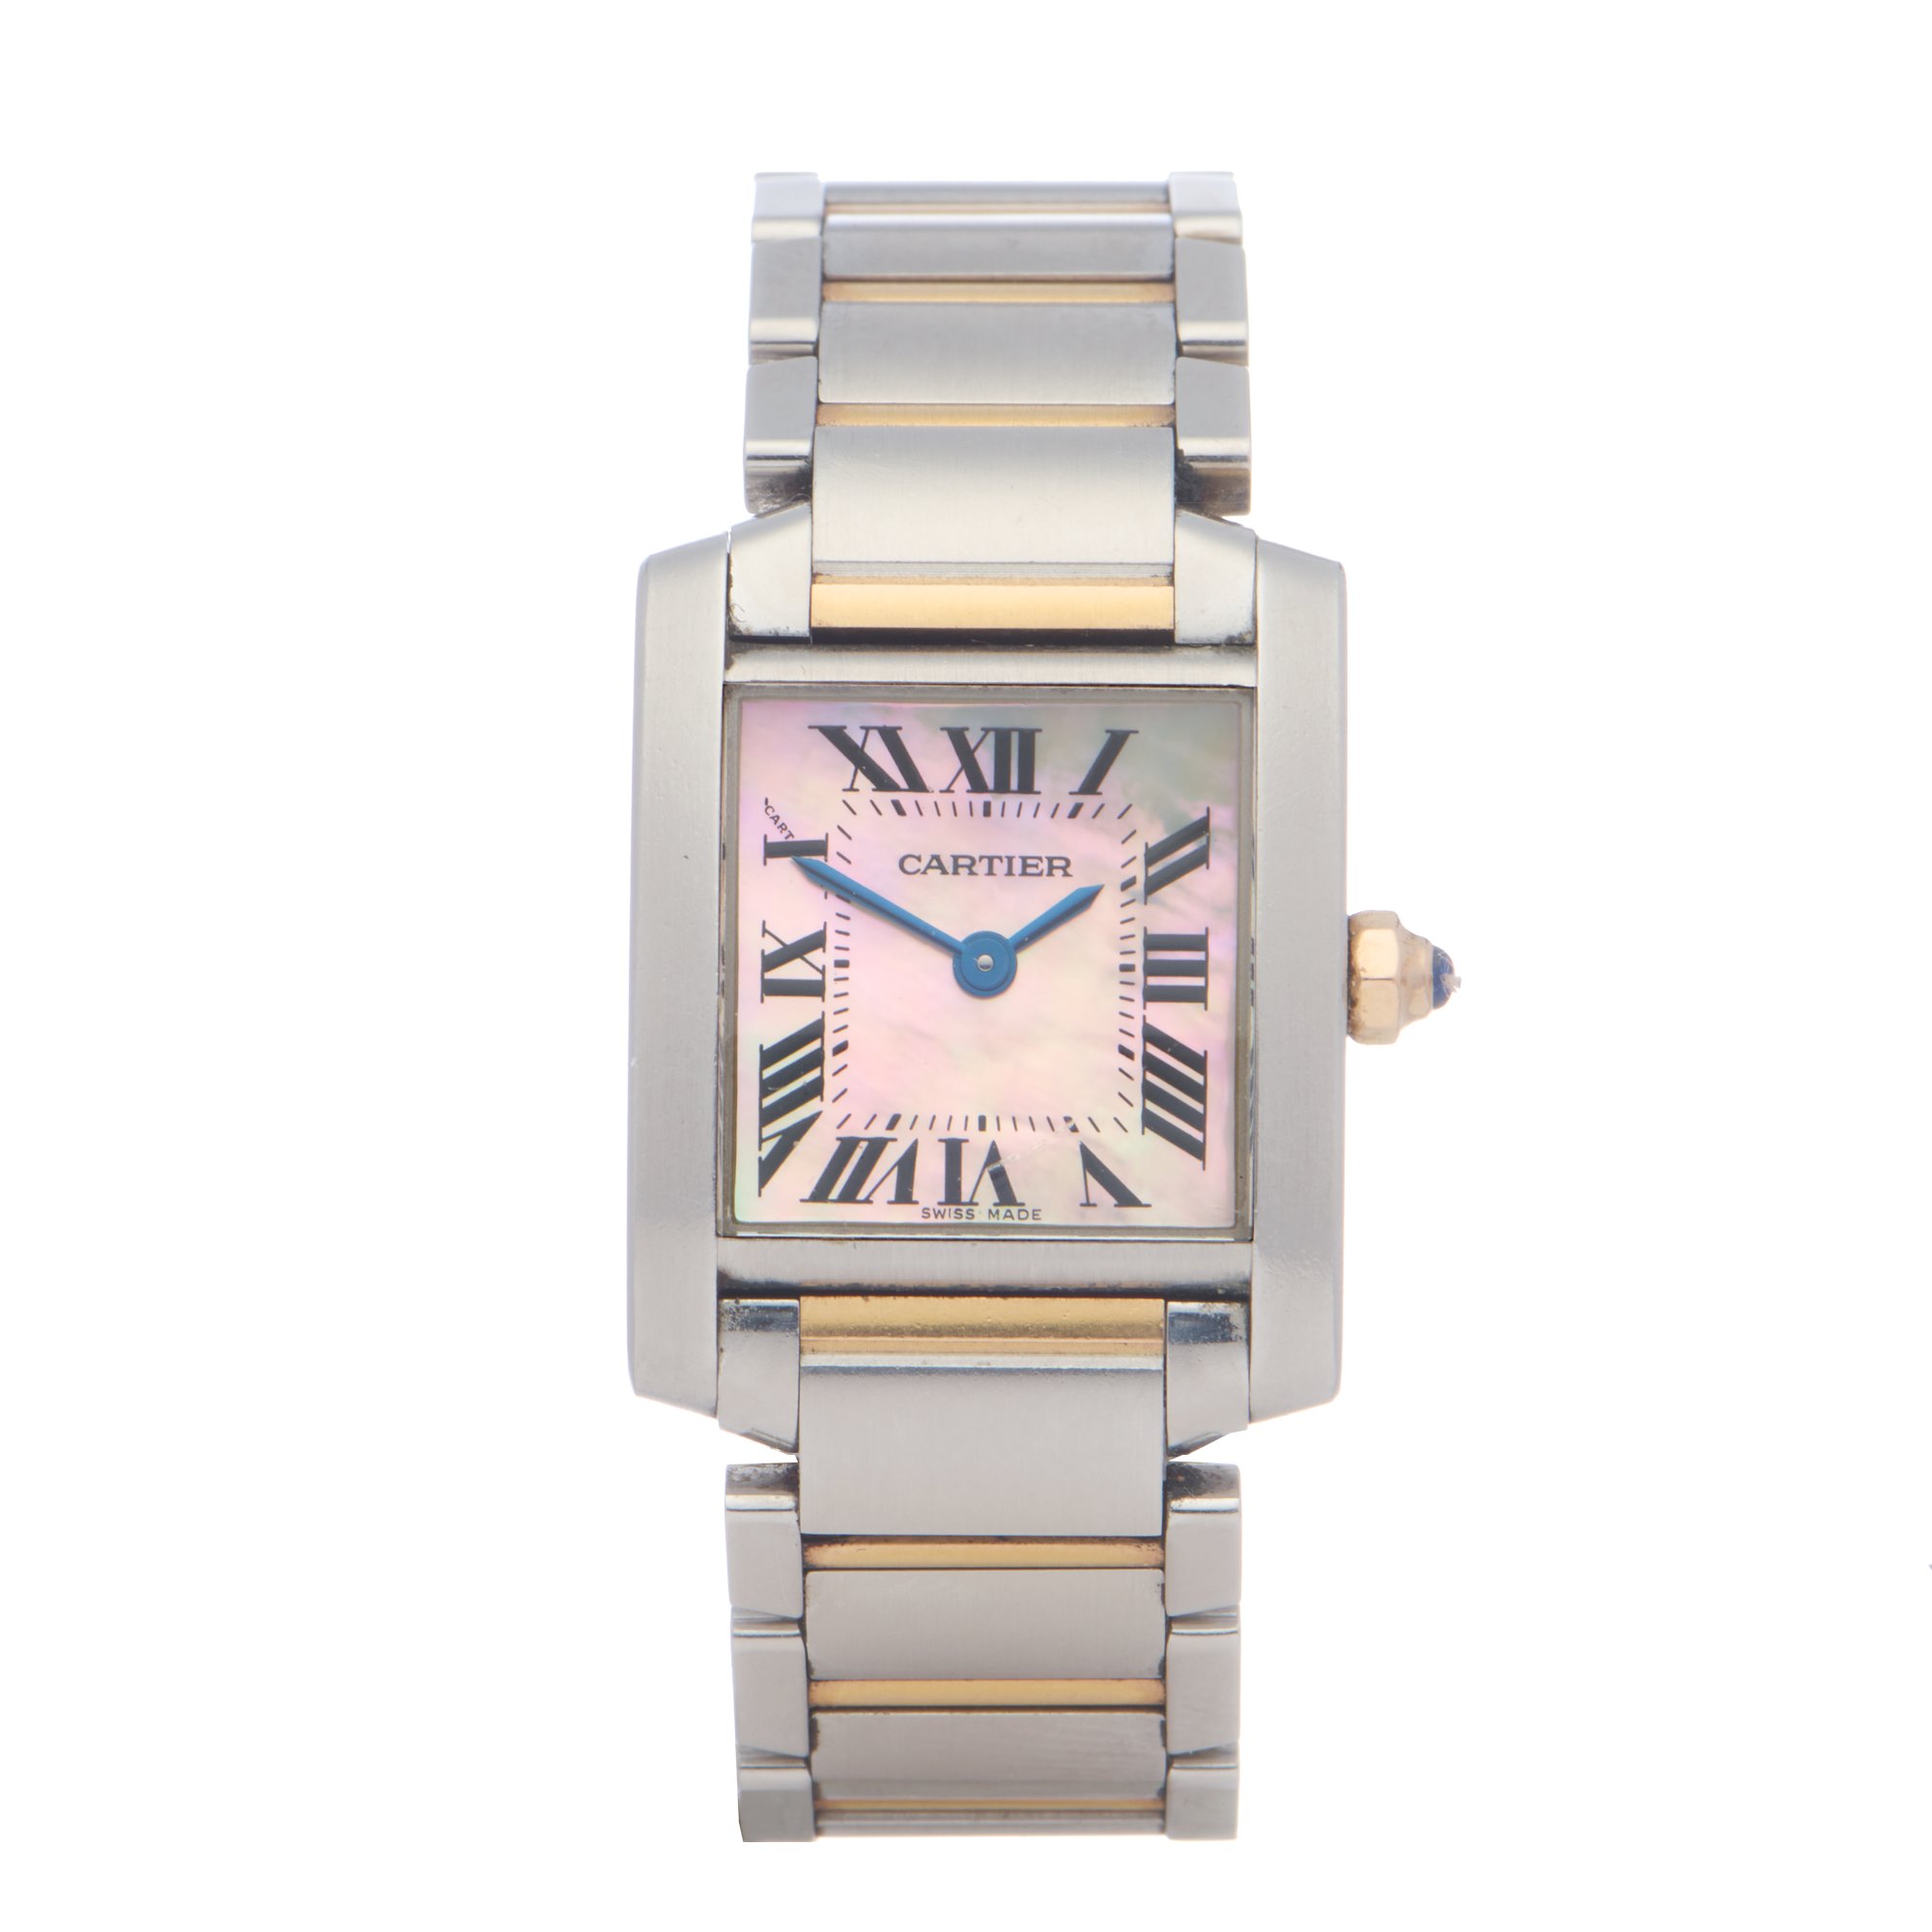 Cartier Tank Francaise 18K Yellow Gold & Stainless Steel W51027Q4